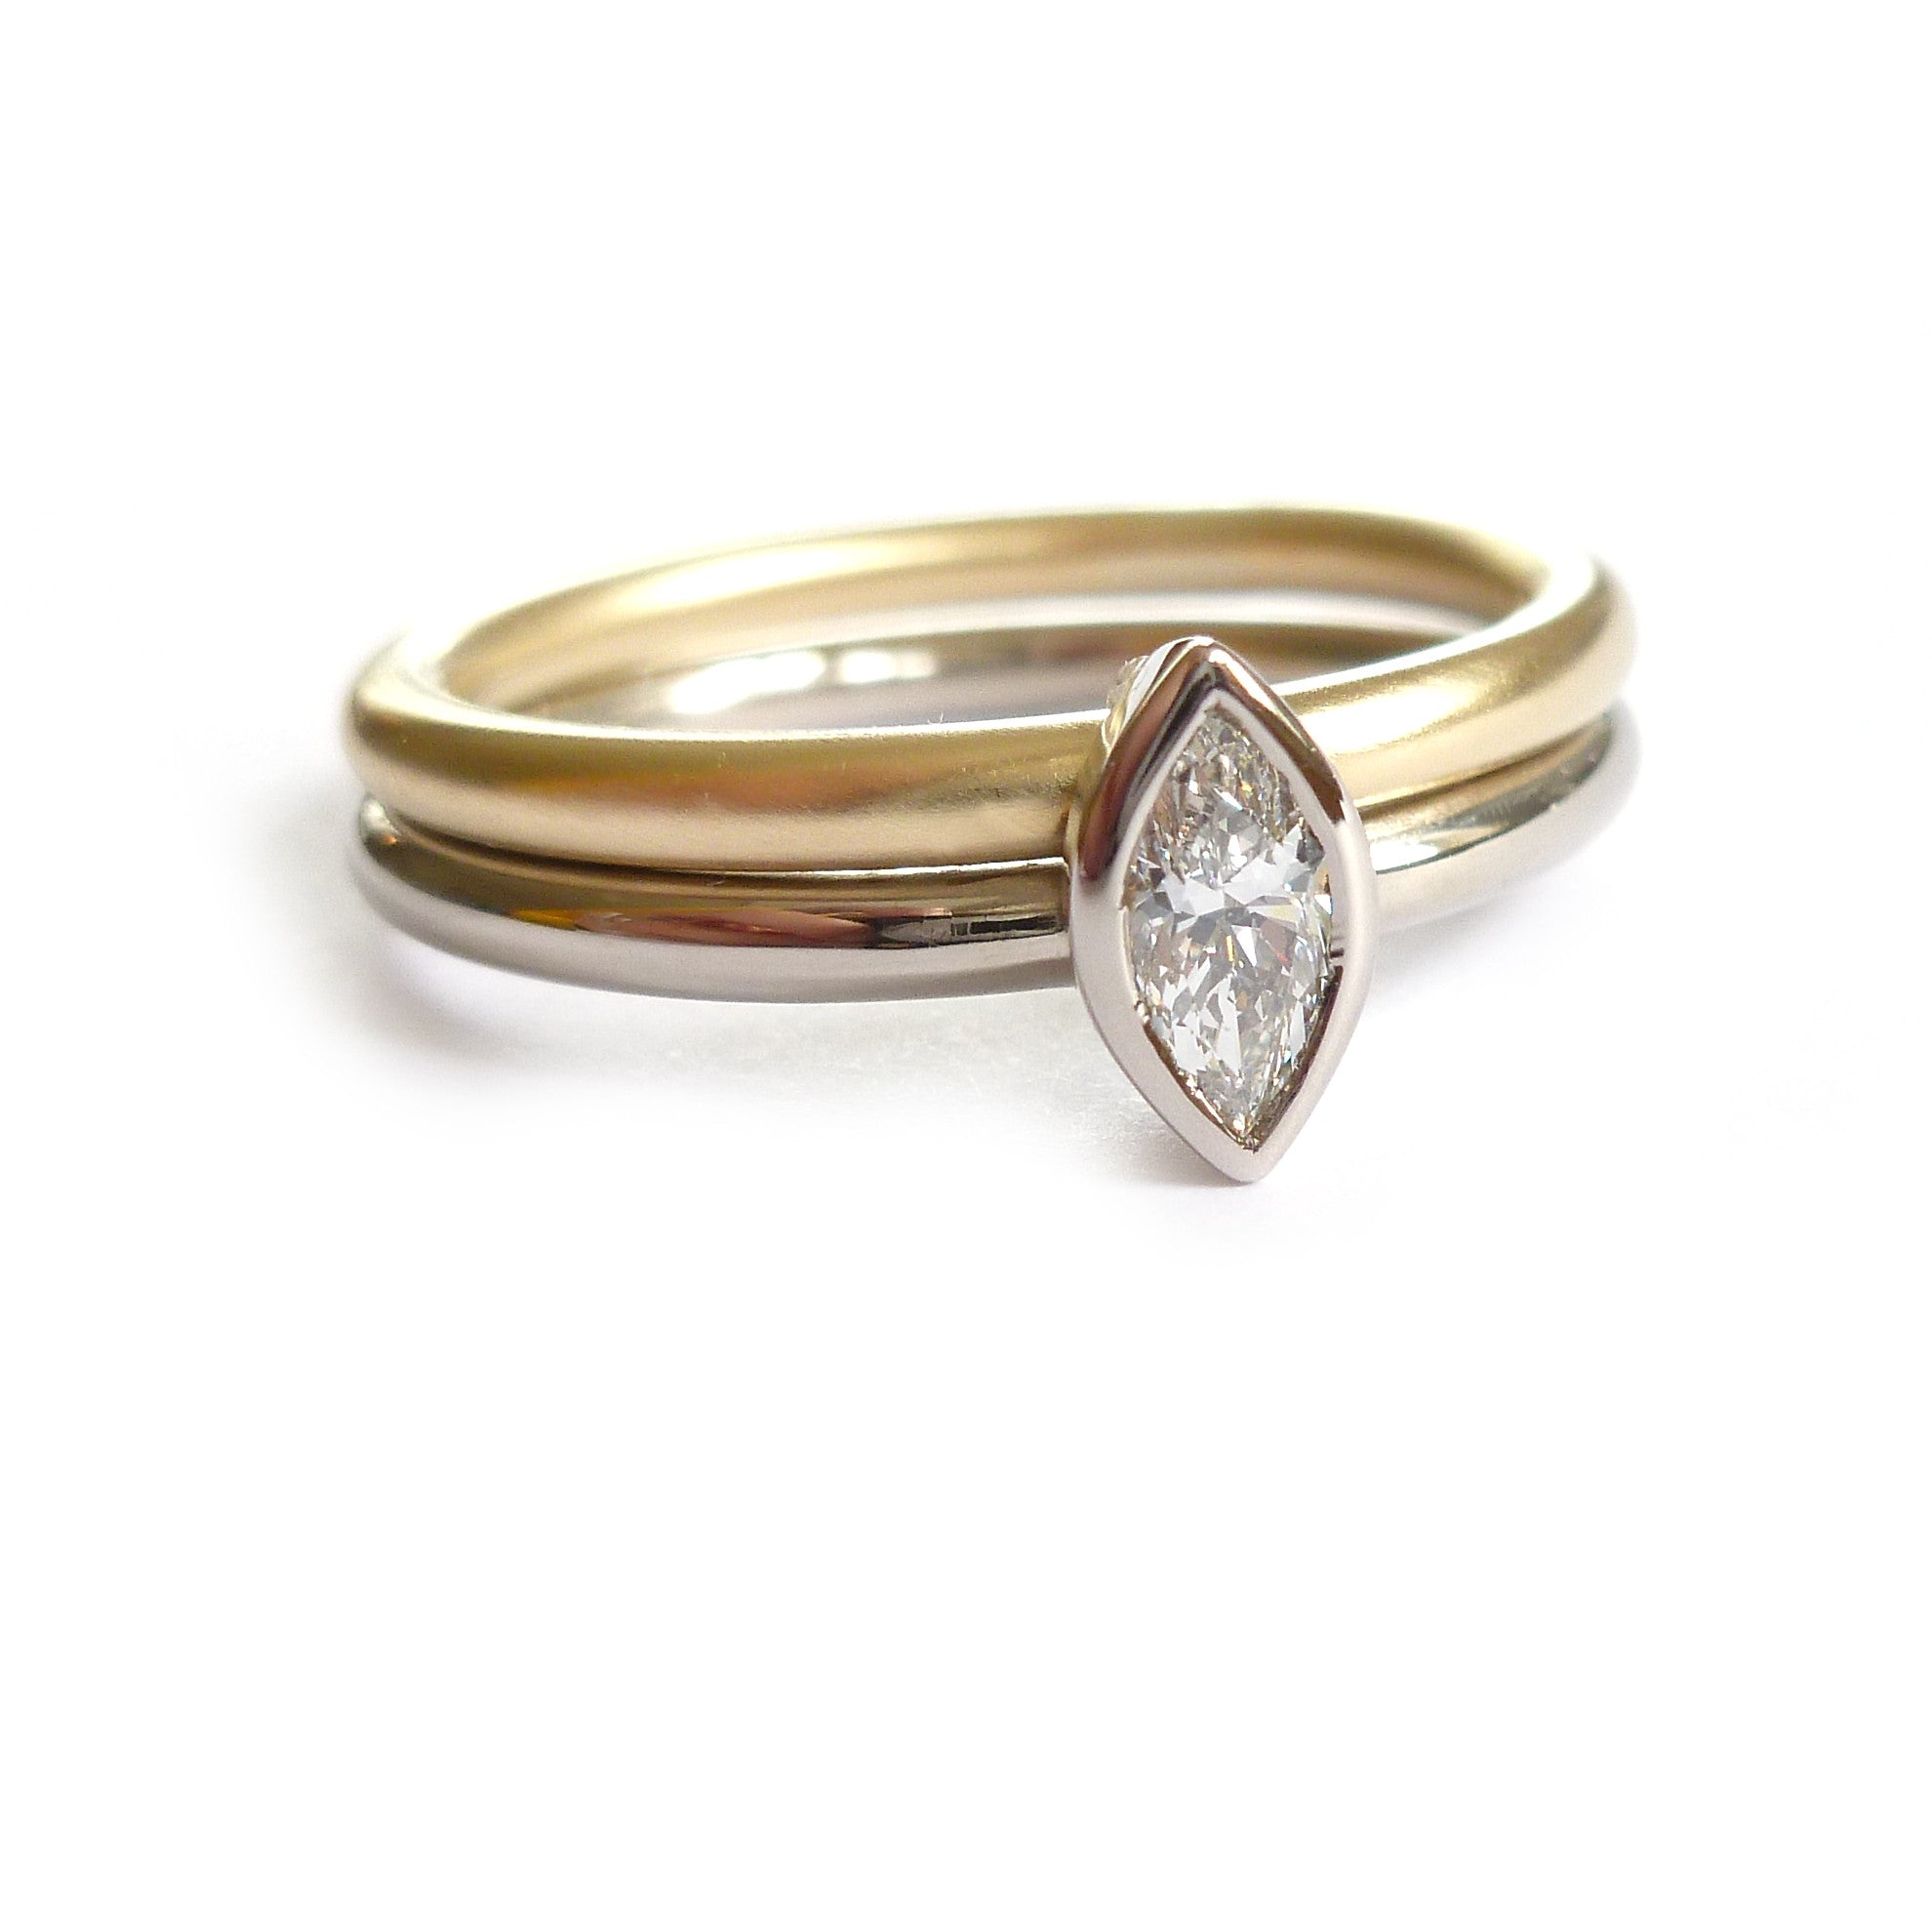 Two linking rings joined together making a special engagement ring. Multi band ring or interlocking ring, sometimes called double band ring too. Contemporary and bespoke. 